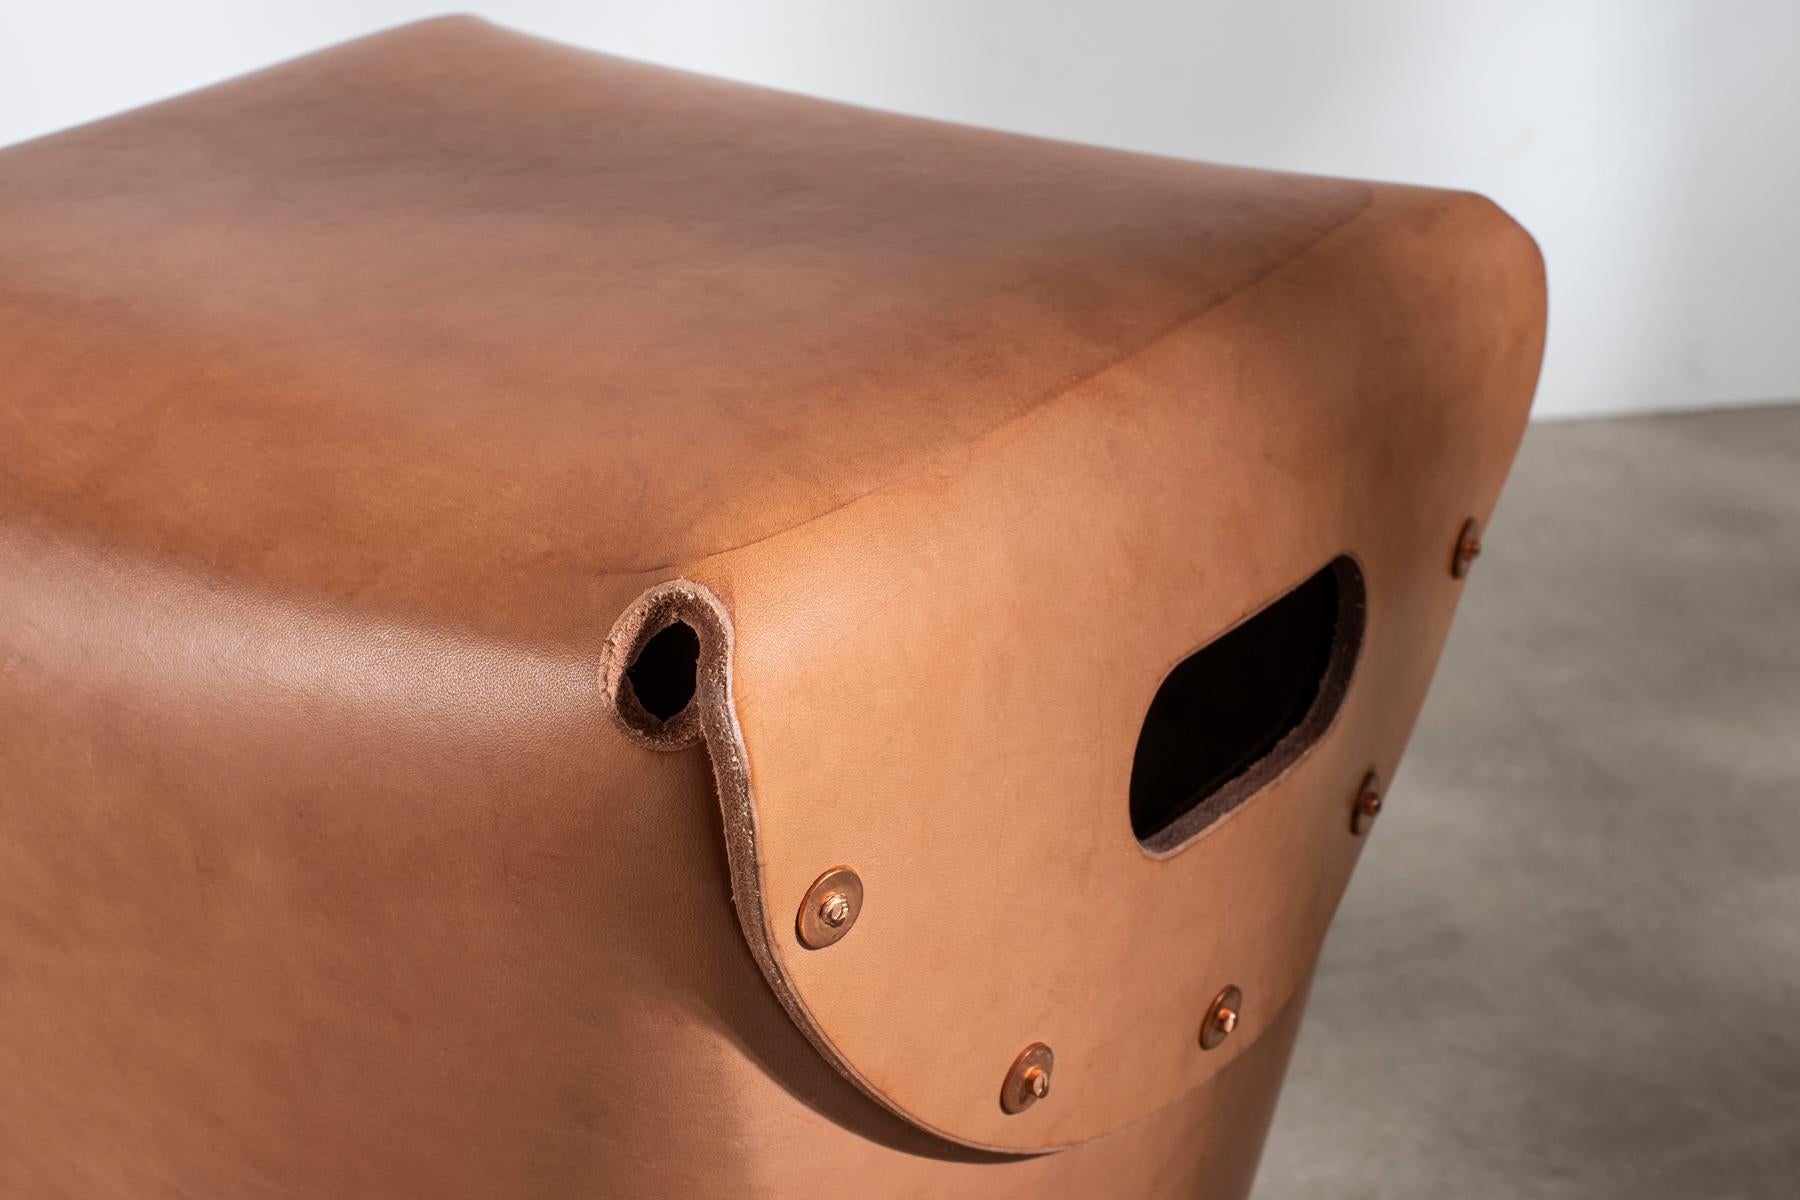 Scandinavian Modern Rivet Stool I by Bill Amberg, vegetable-tanned leather with hand-set rivets For Sale